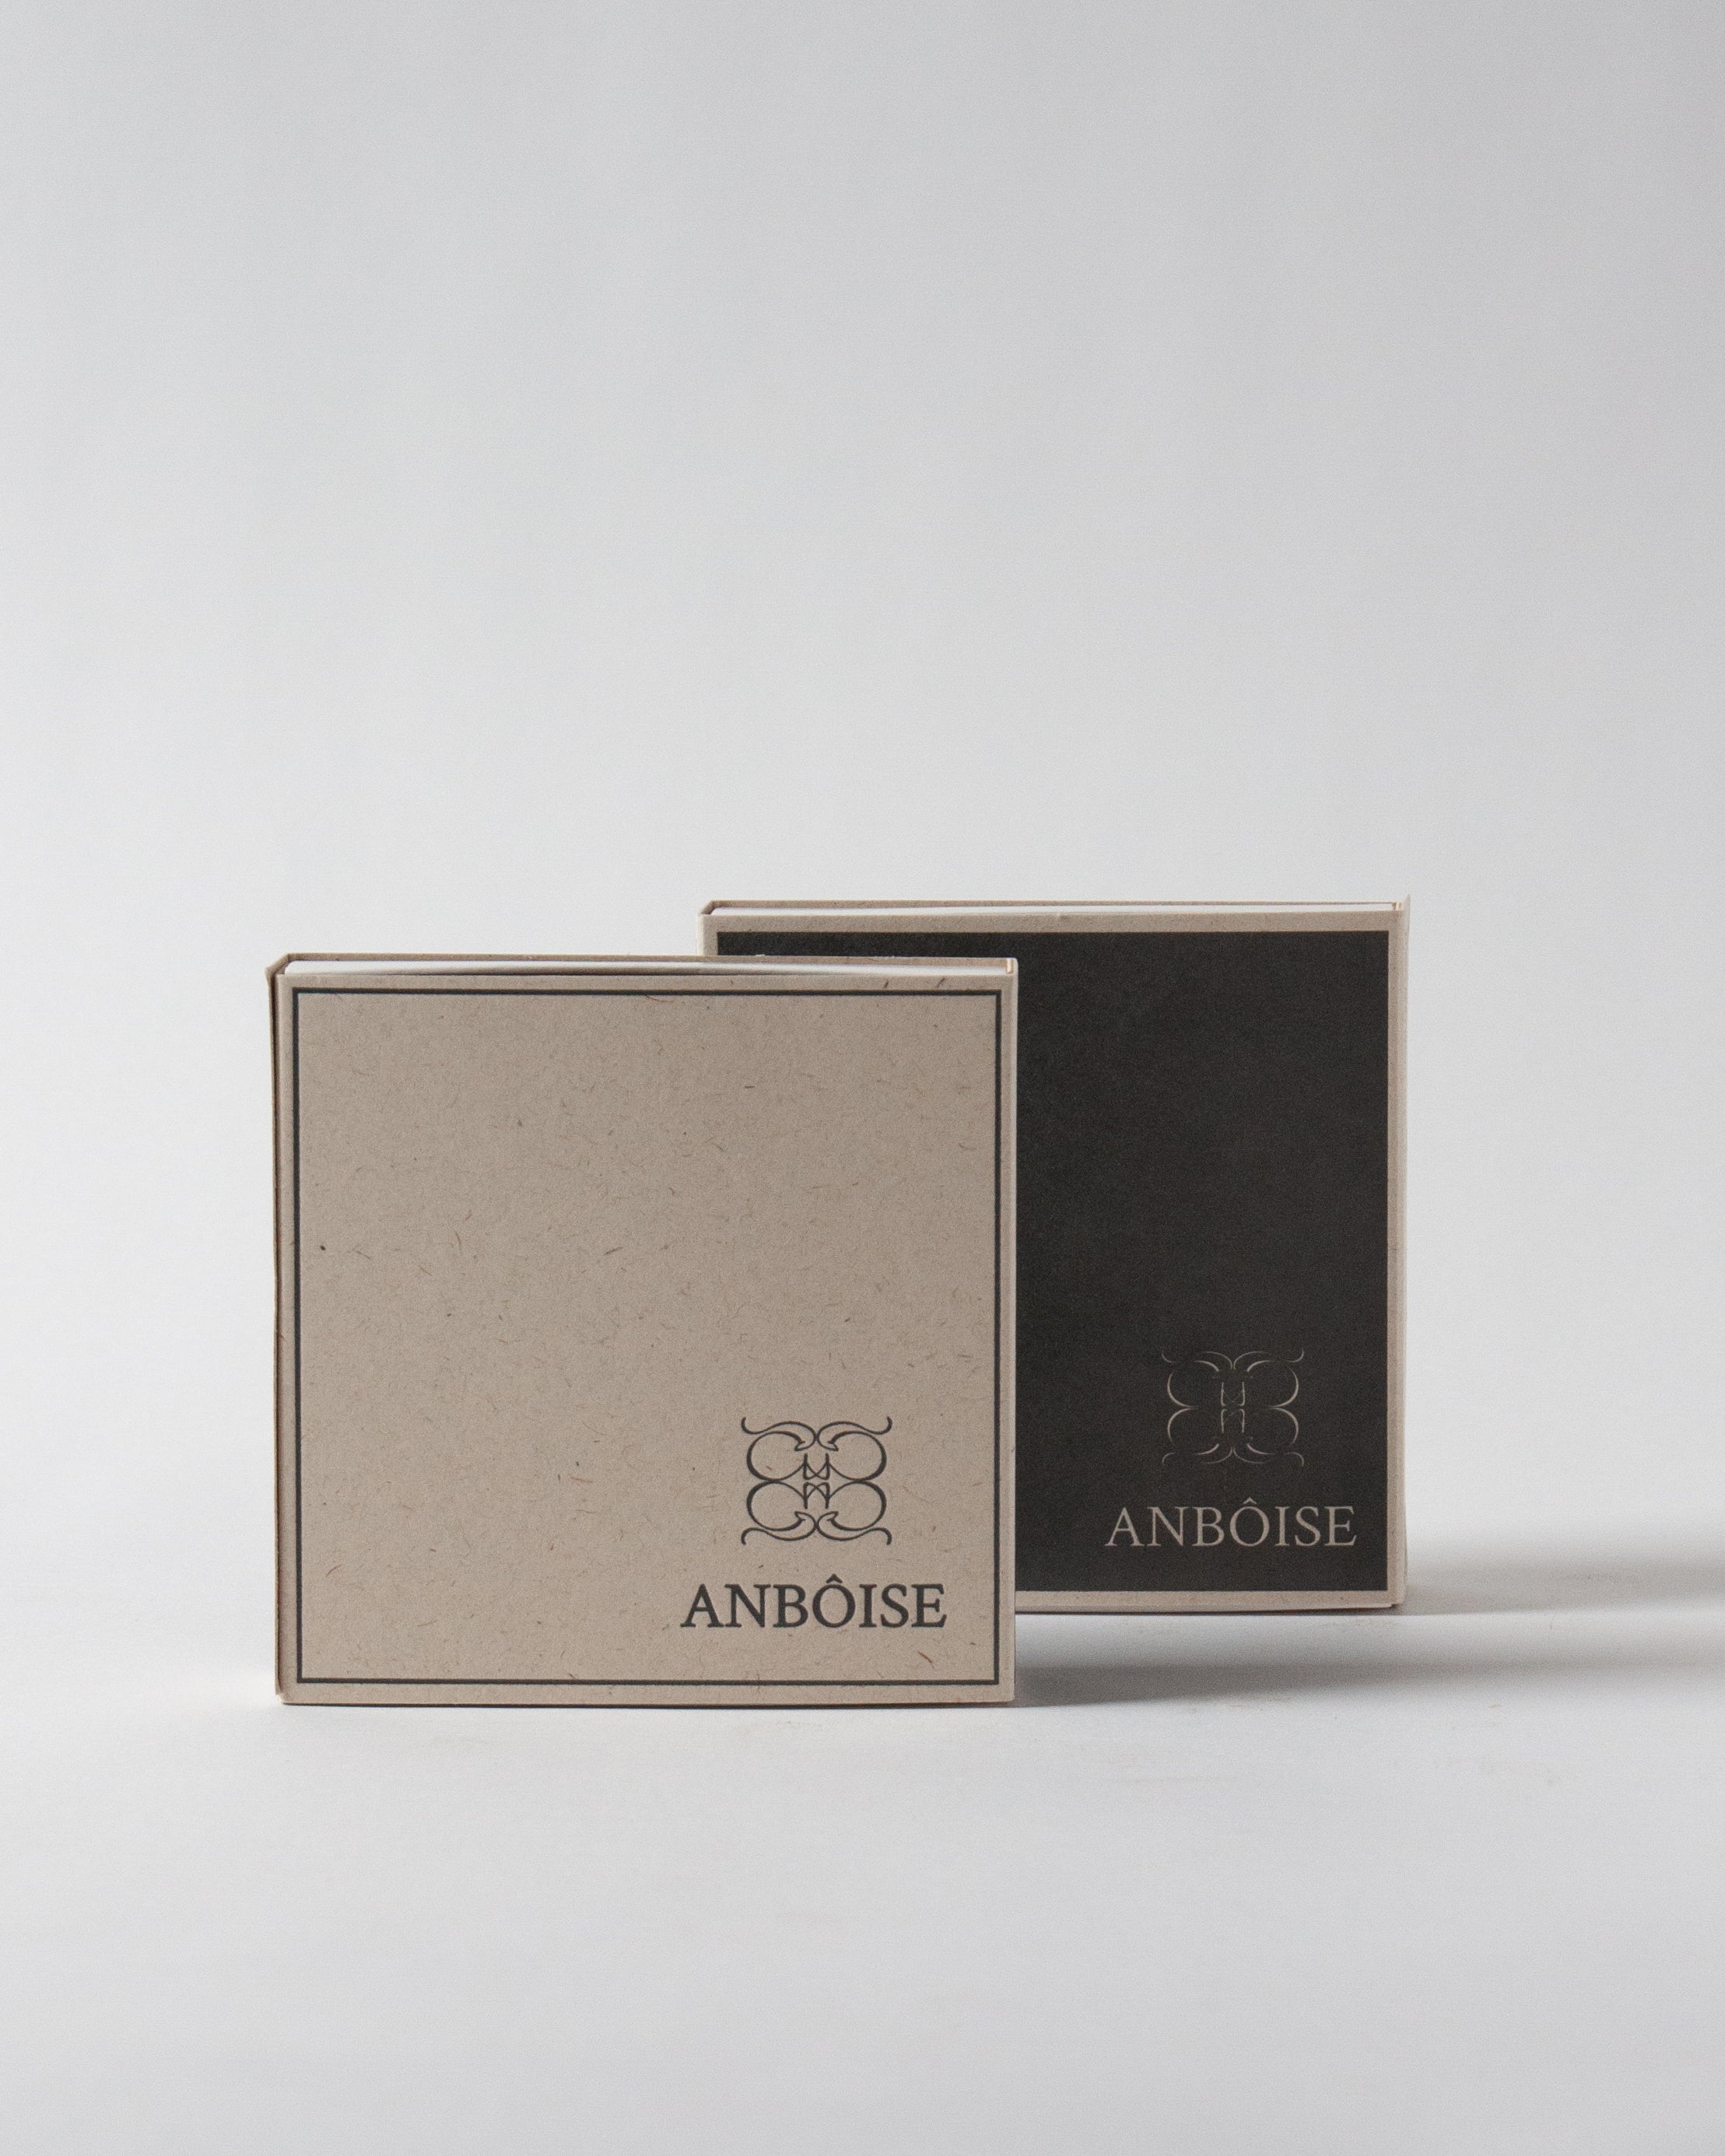 Anboise Luxury Candle Matches